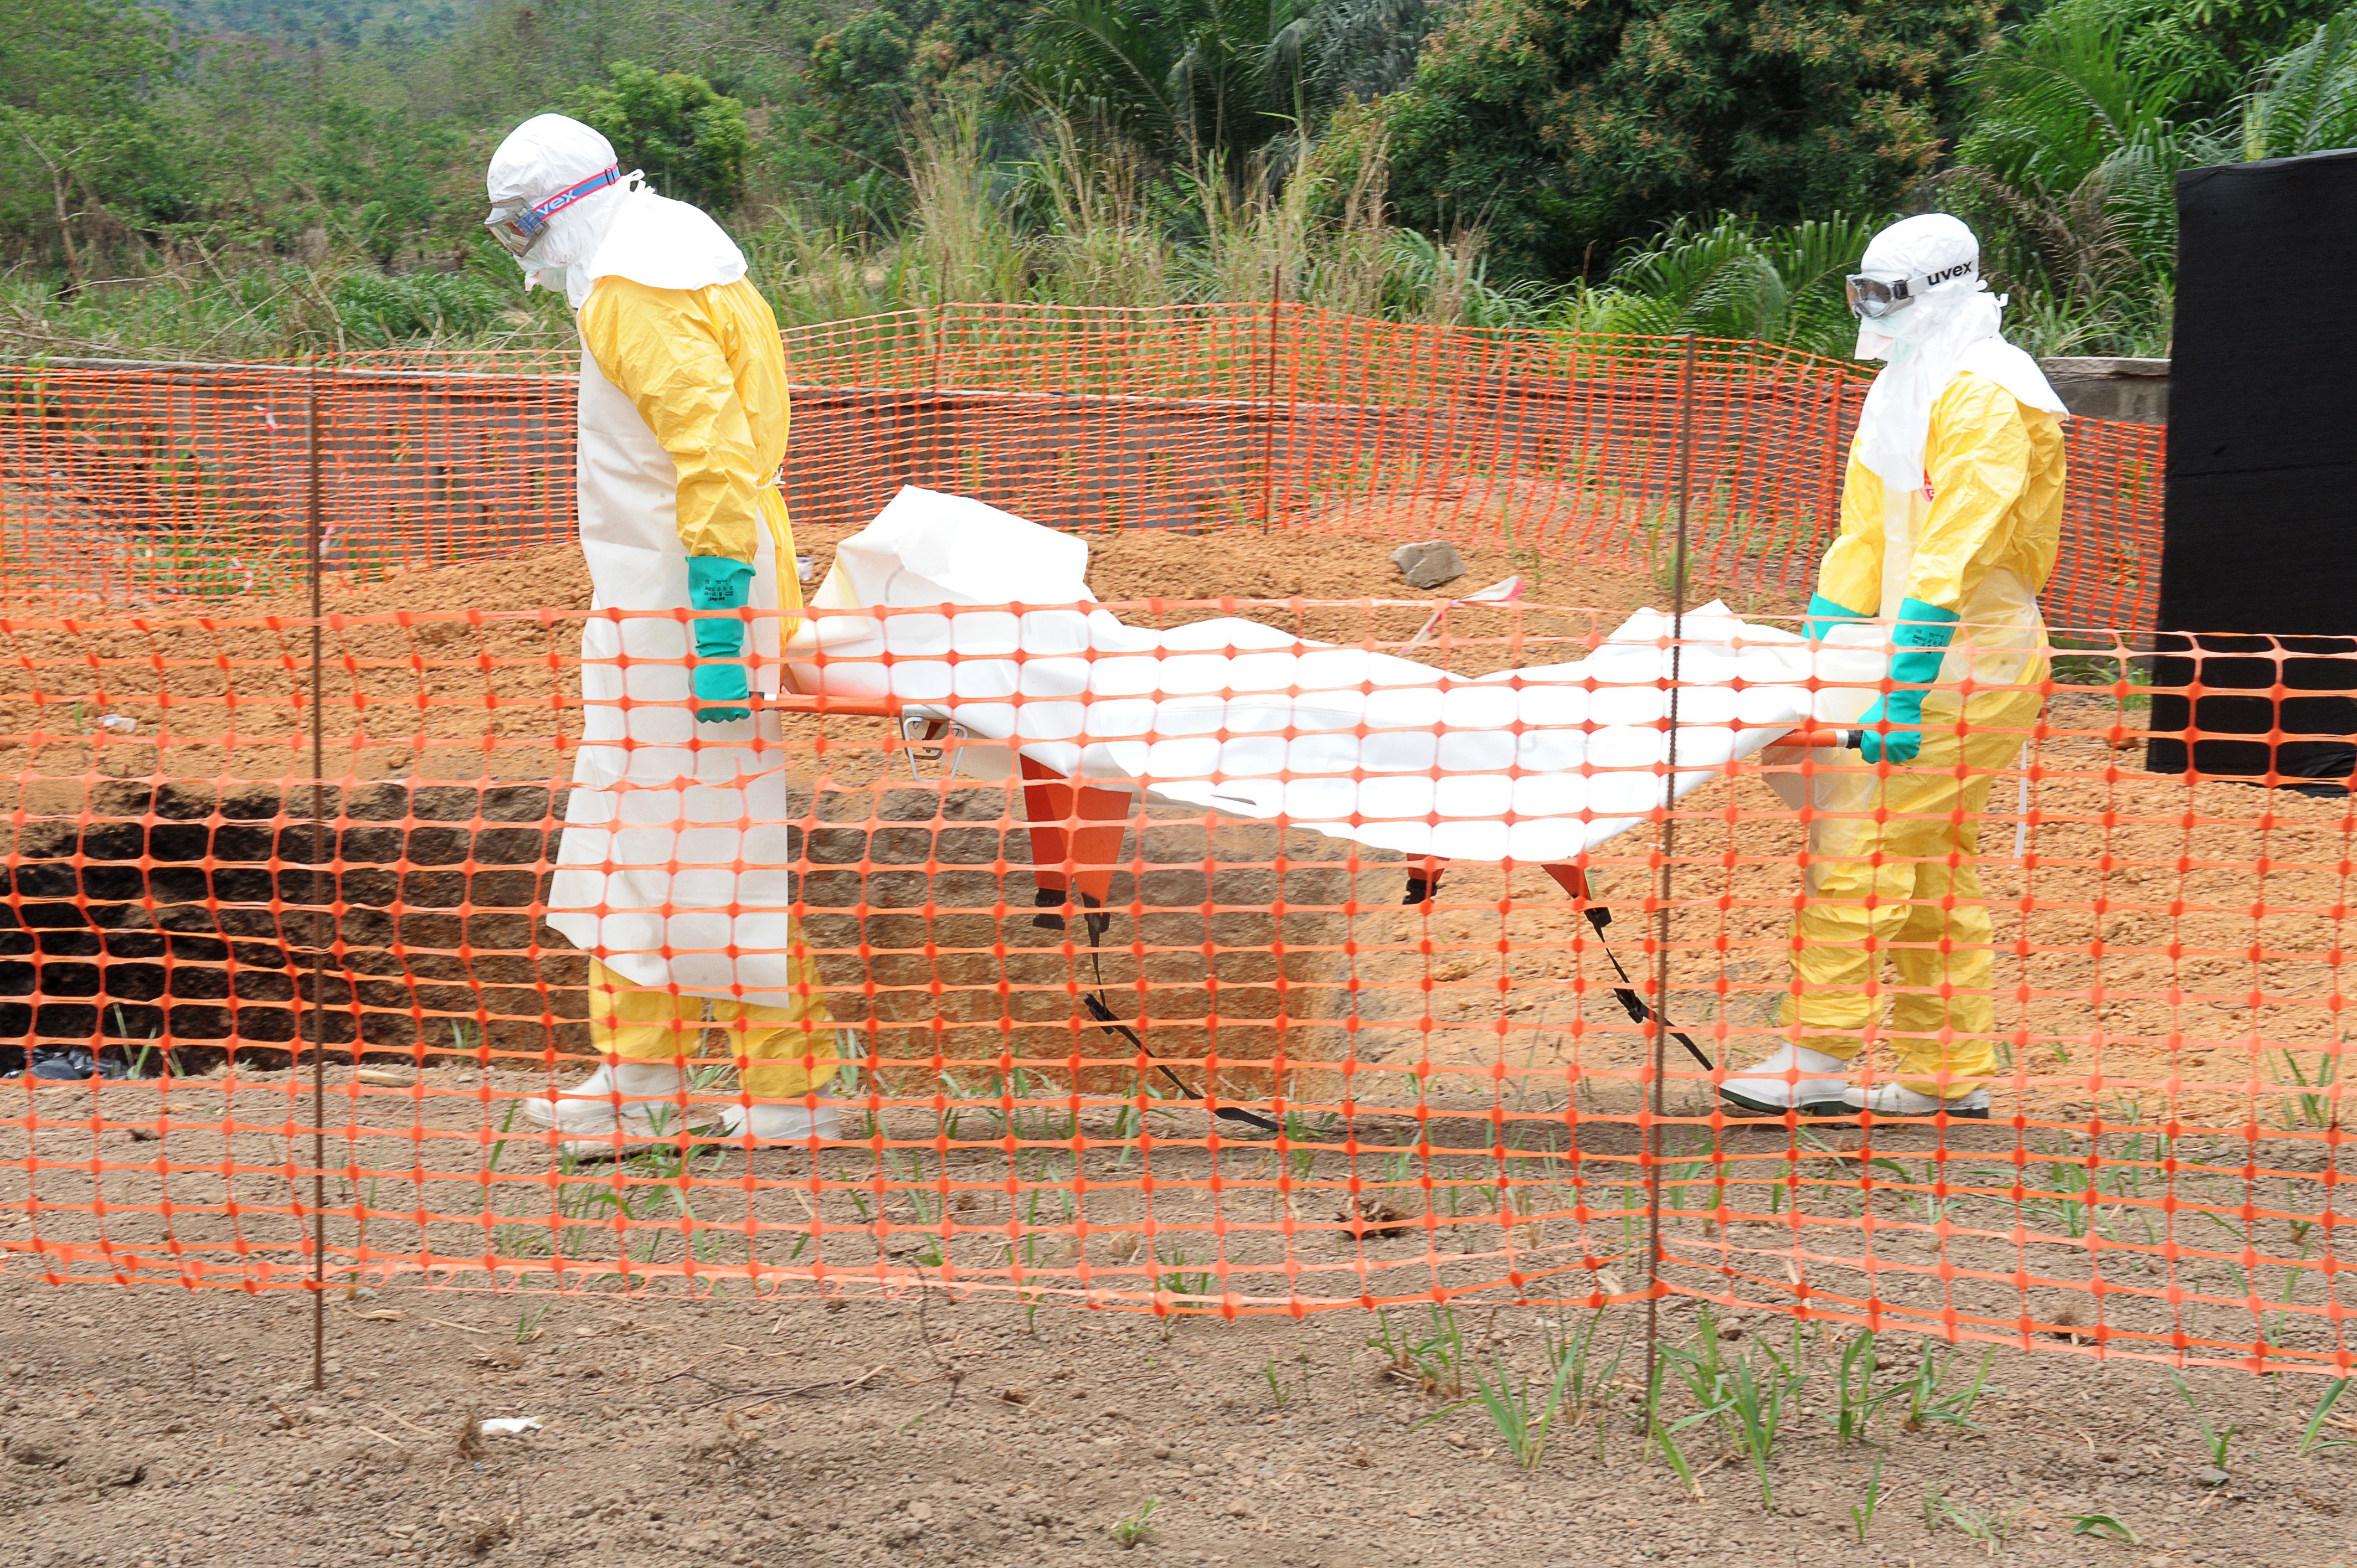 Doctors Without Borders staff carry the body of a person killed by viral haemorrhagic fever, at a center for victims of the Ebola virus in Guekedou, on April 1, 2014. (Seyllou—AFP/Getty Images)